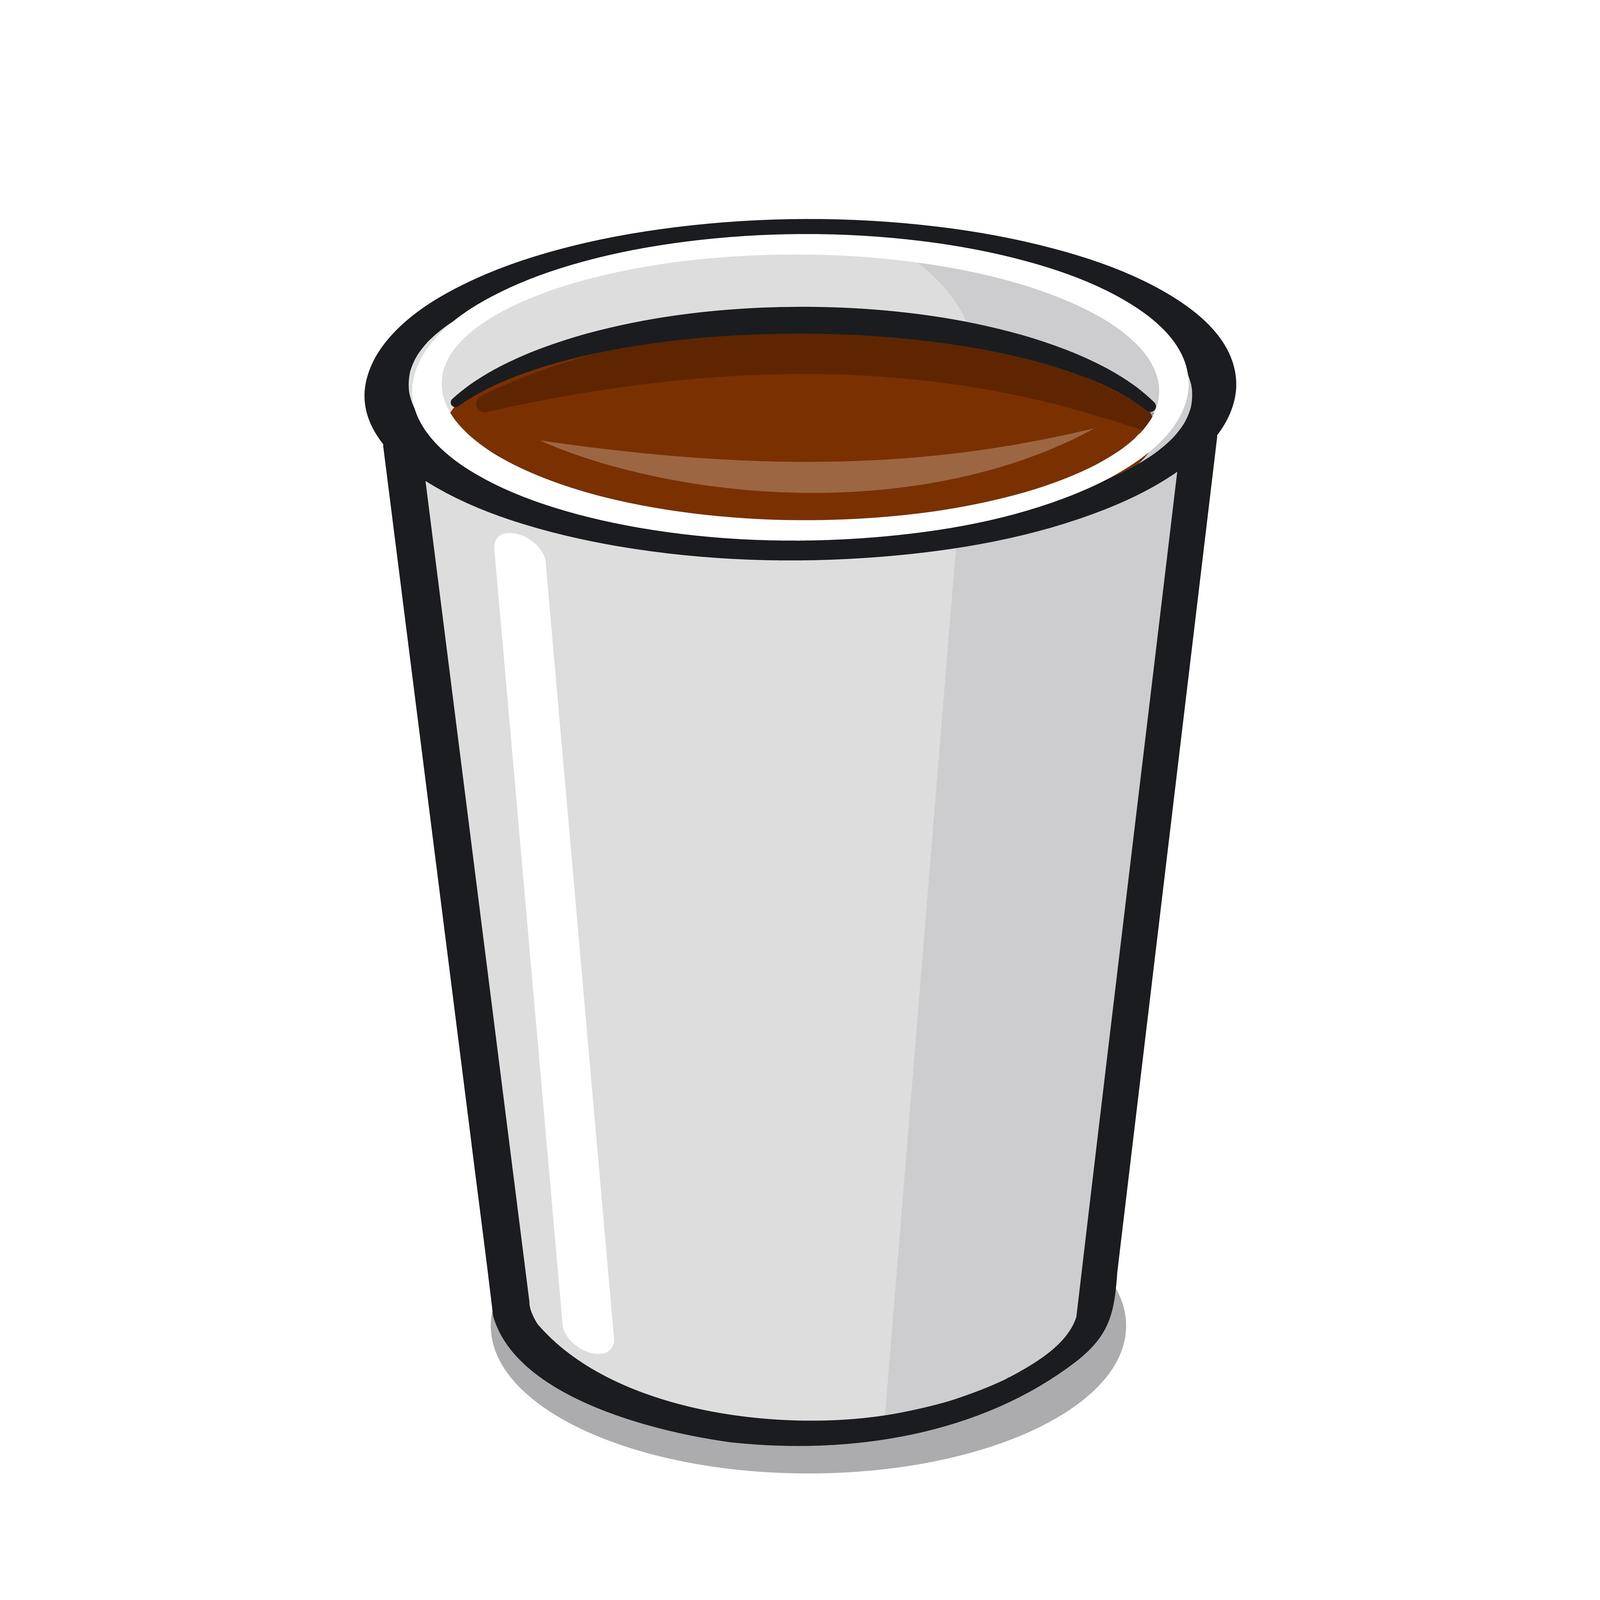 Illustration of the cup with a drink on the white background